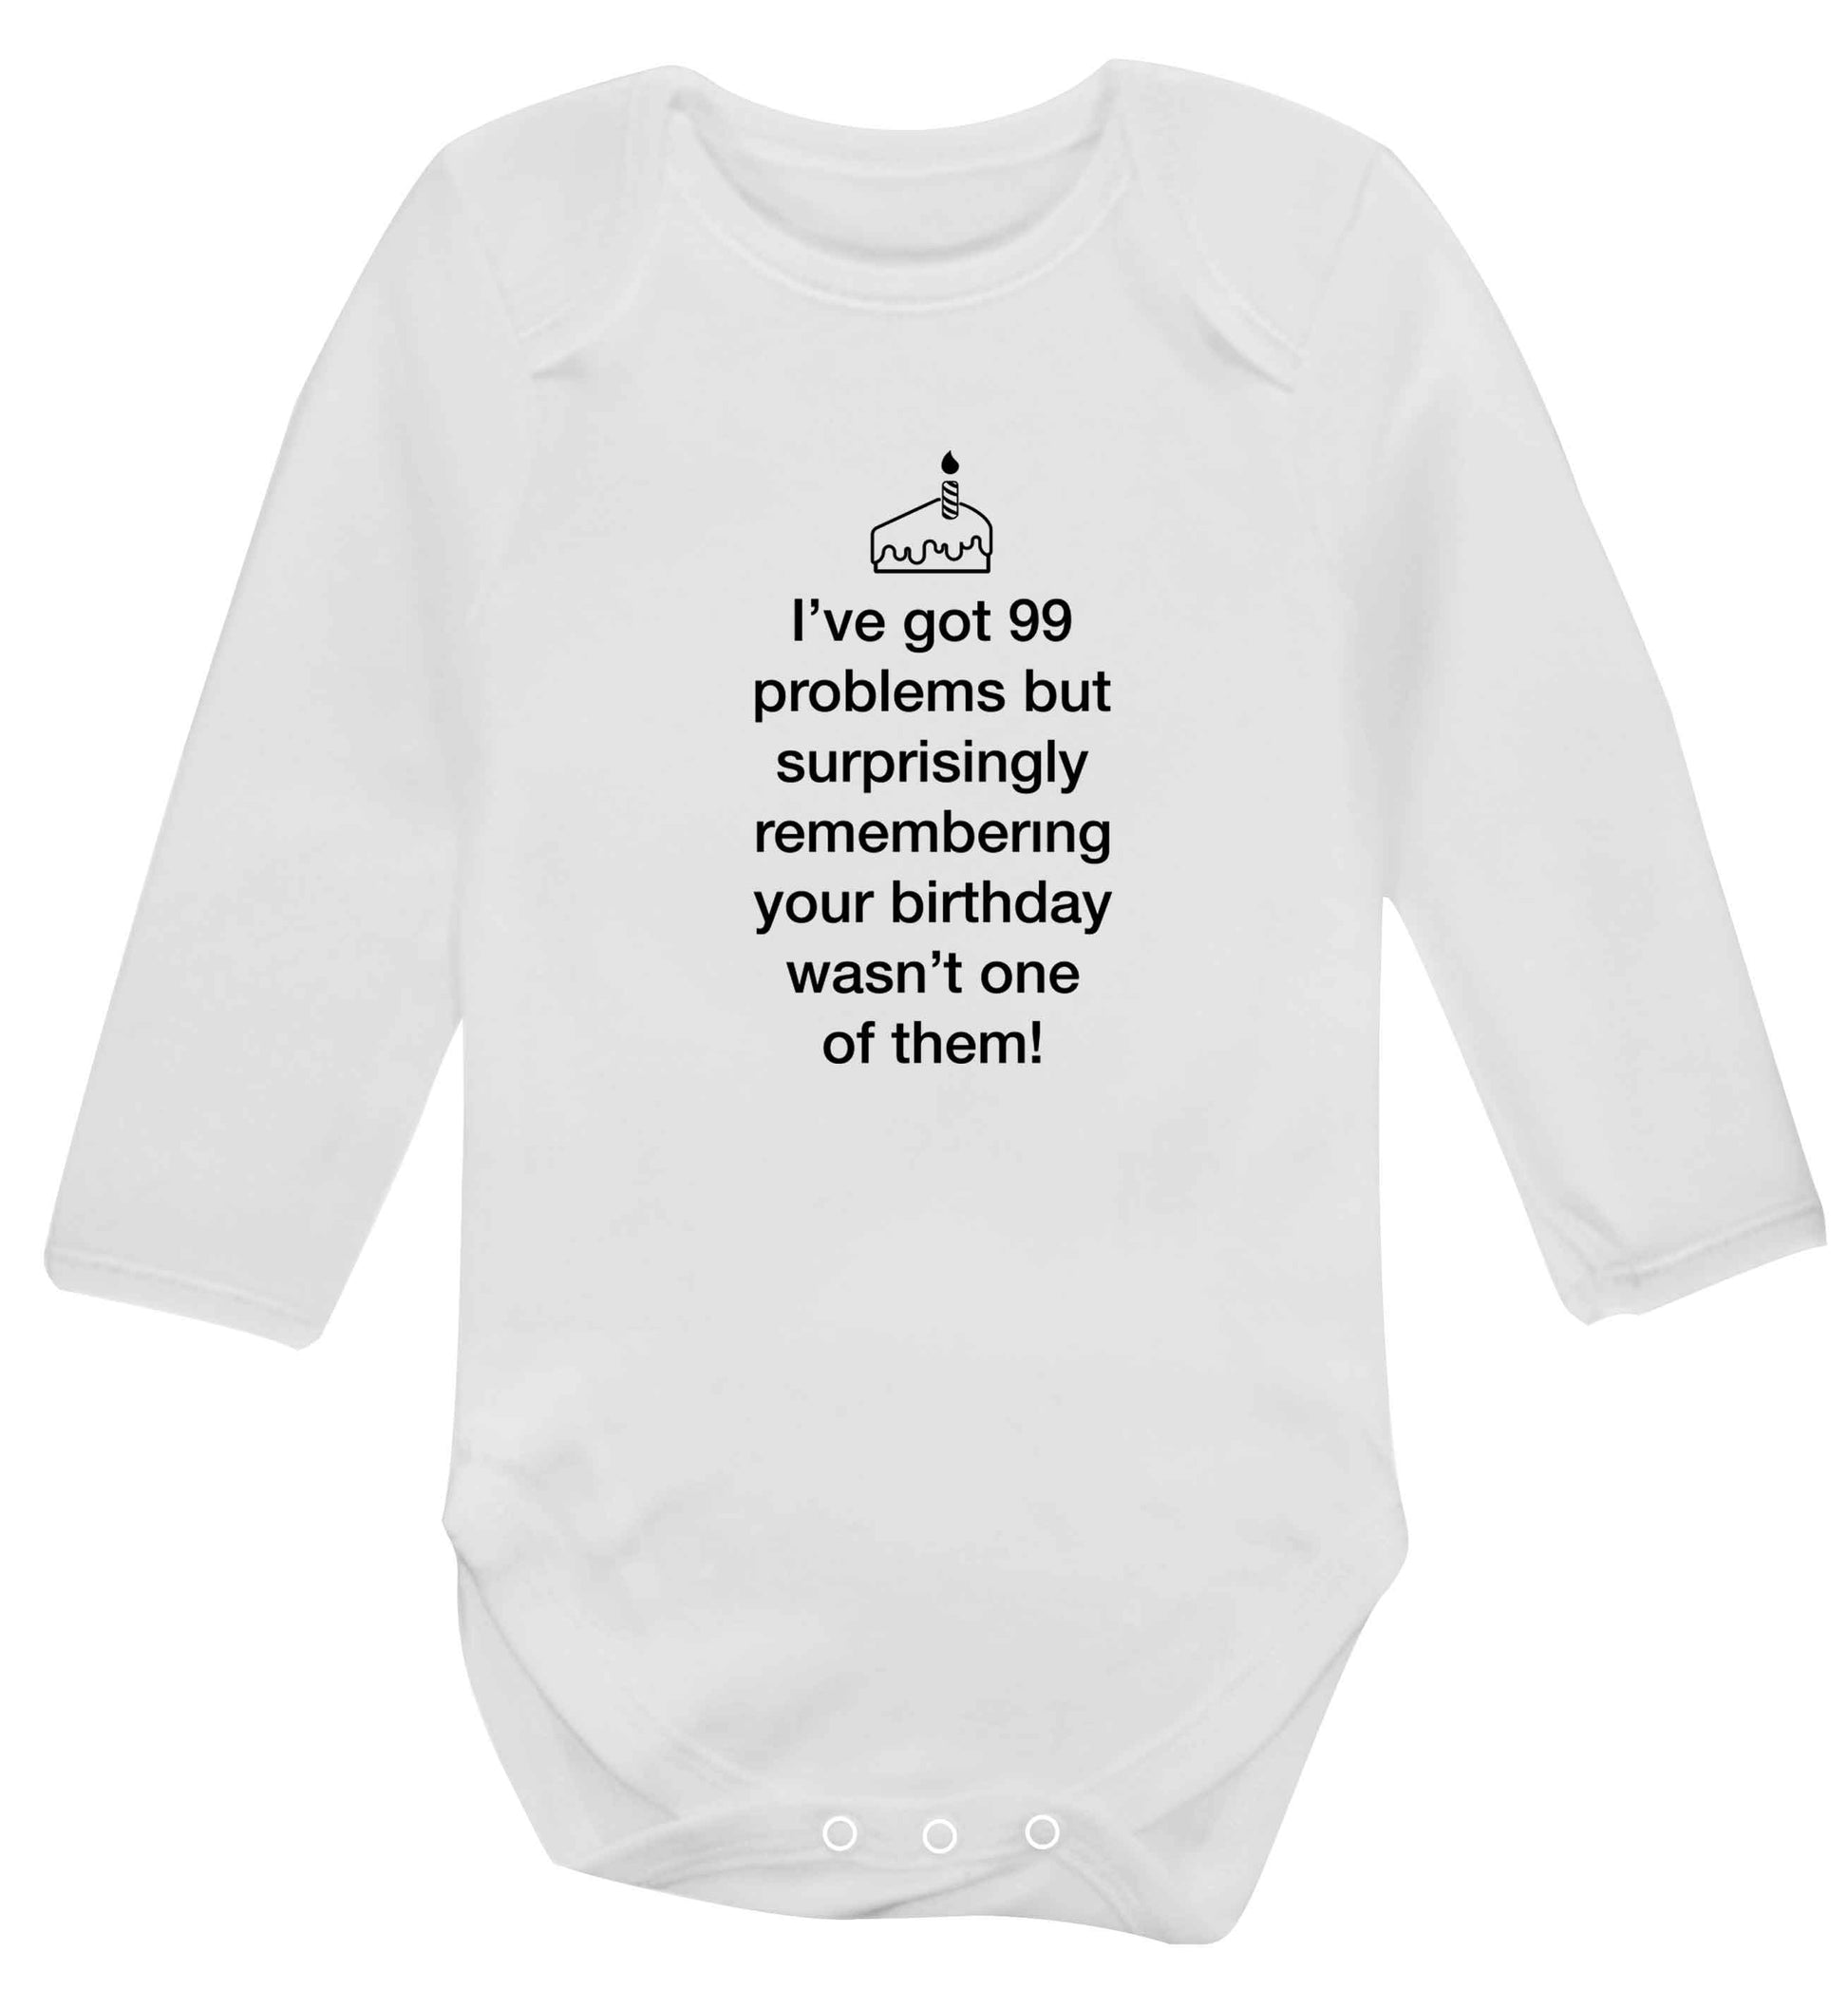 I've got 99 problems but surprisingly remembering your birthday wasn't one of them! baby vest long sleeved white 6-12 months